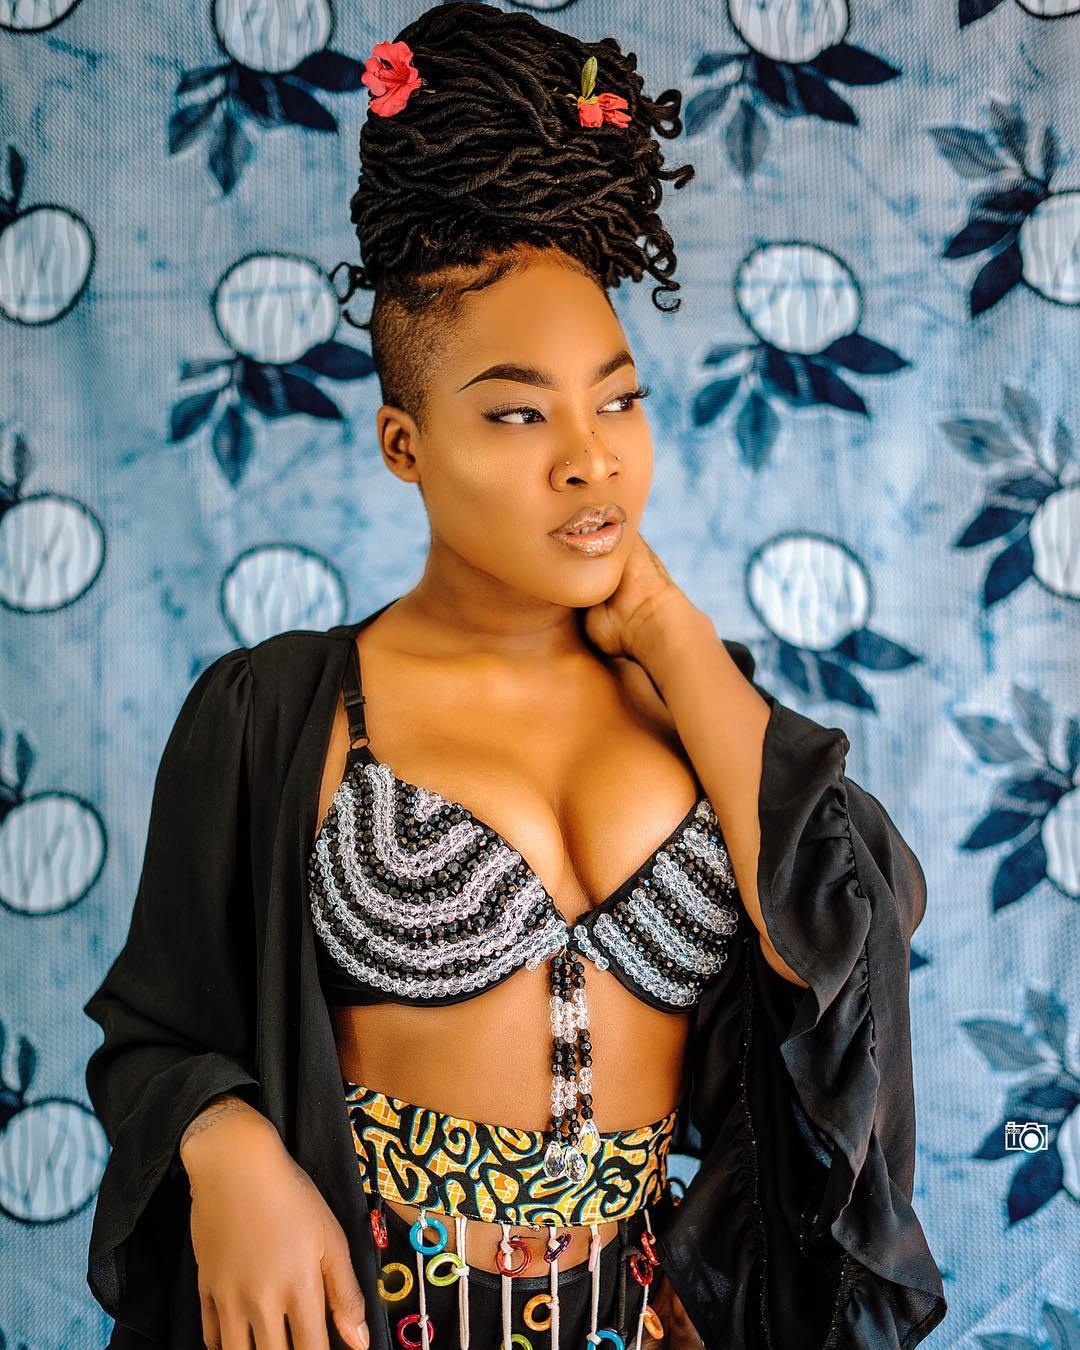 Charlyboy's daughter, Dewy, shows off lesbian partner (Video)